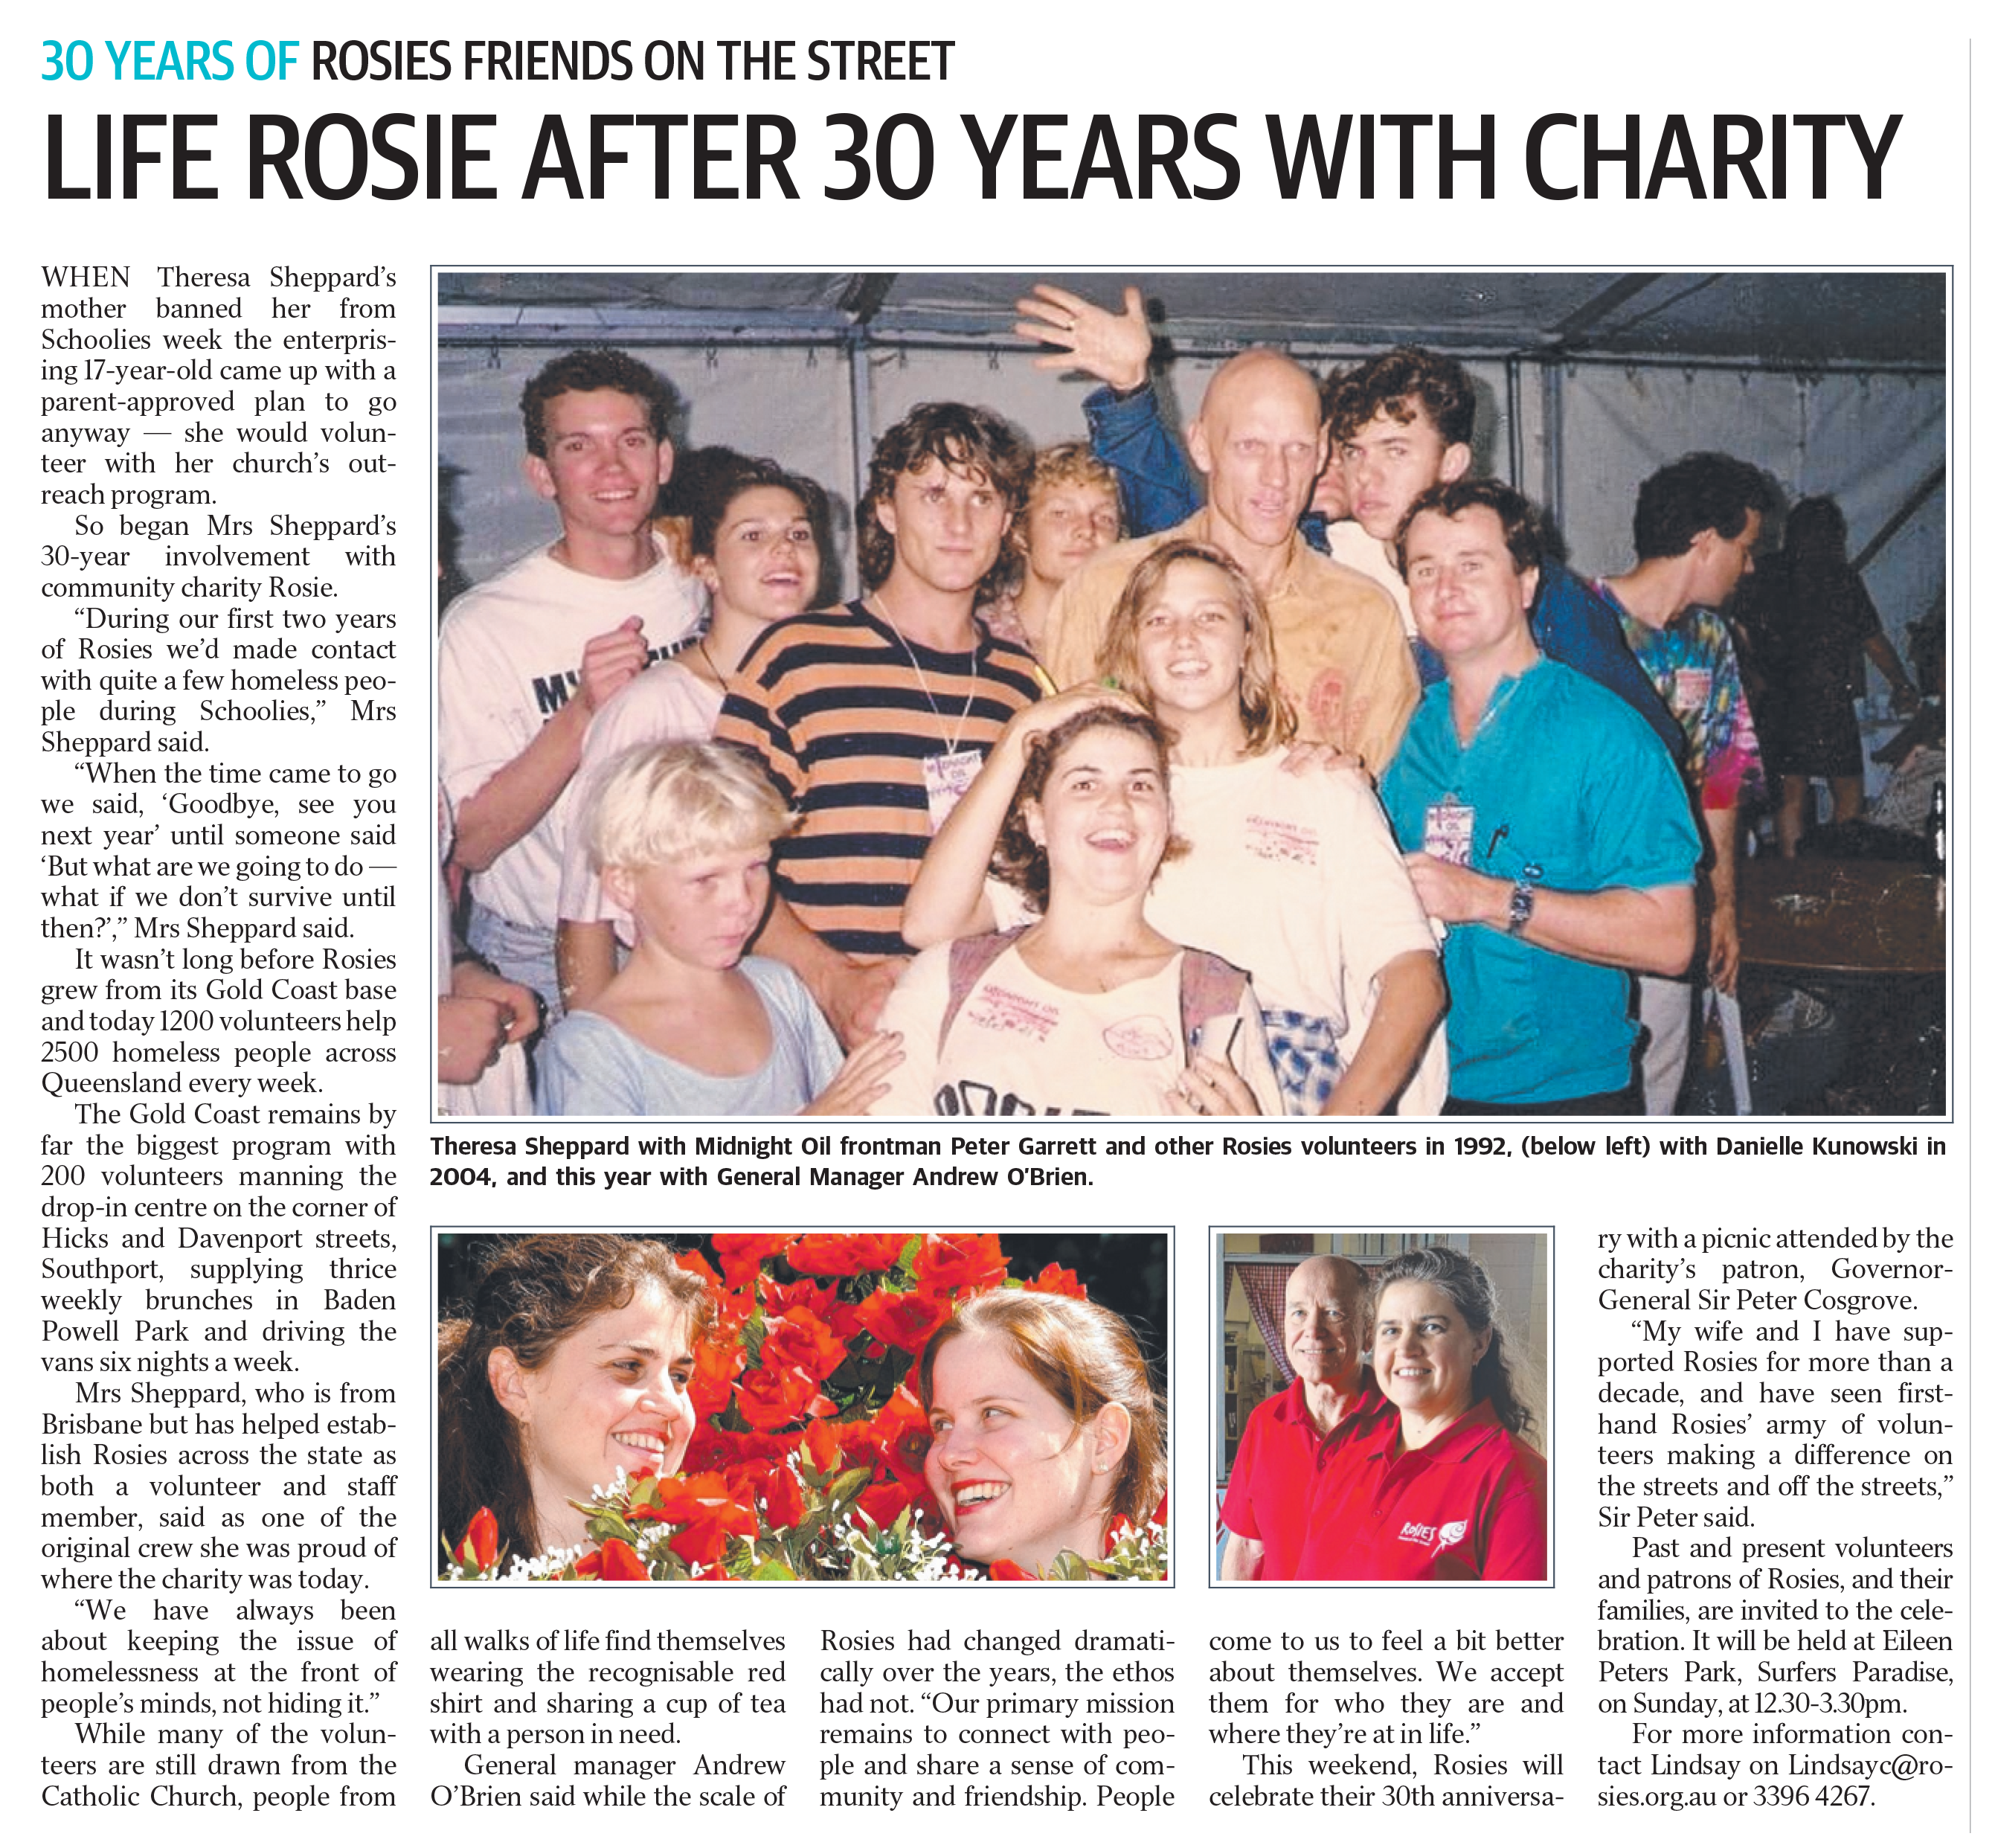 30 years of Rosies Friends on the Street